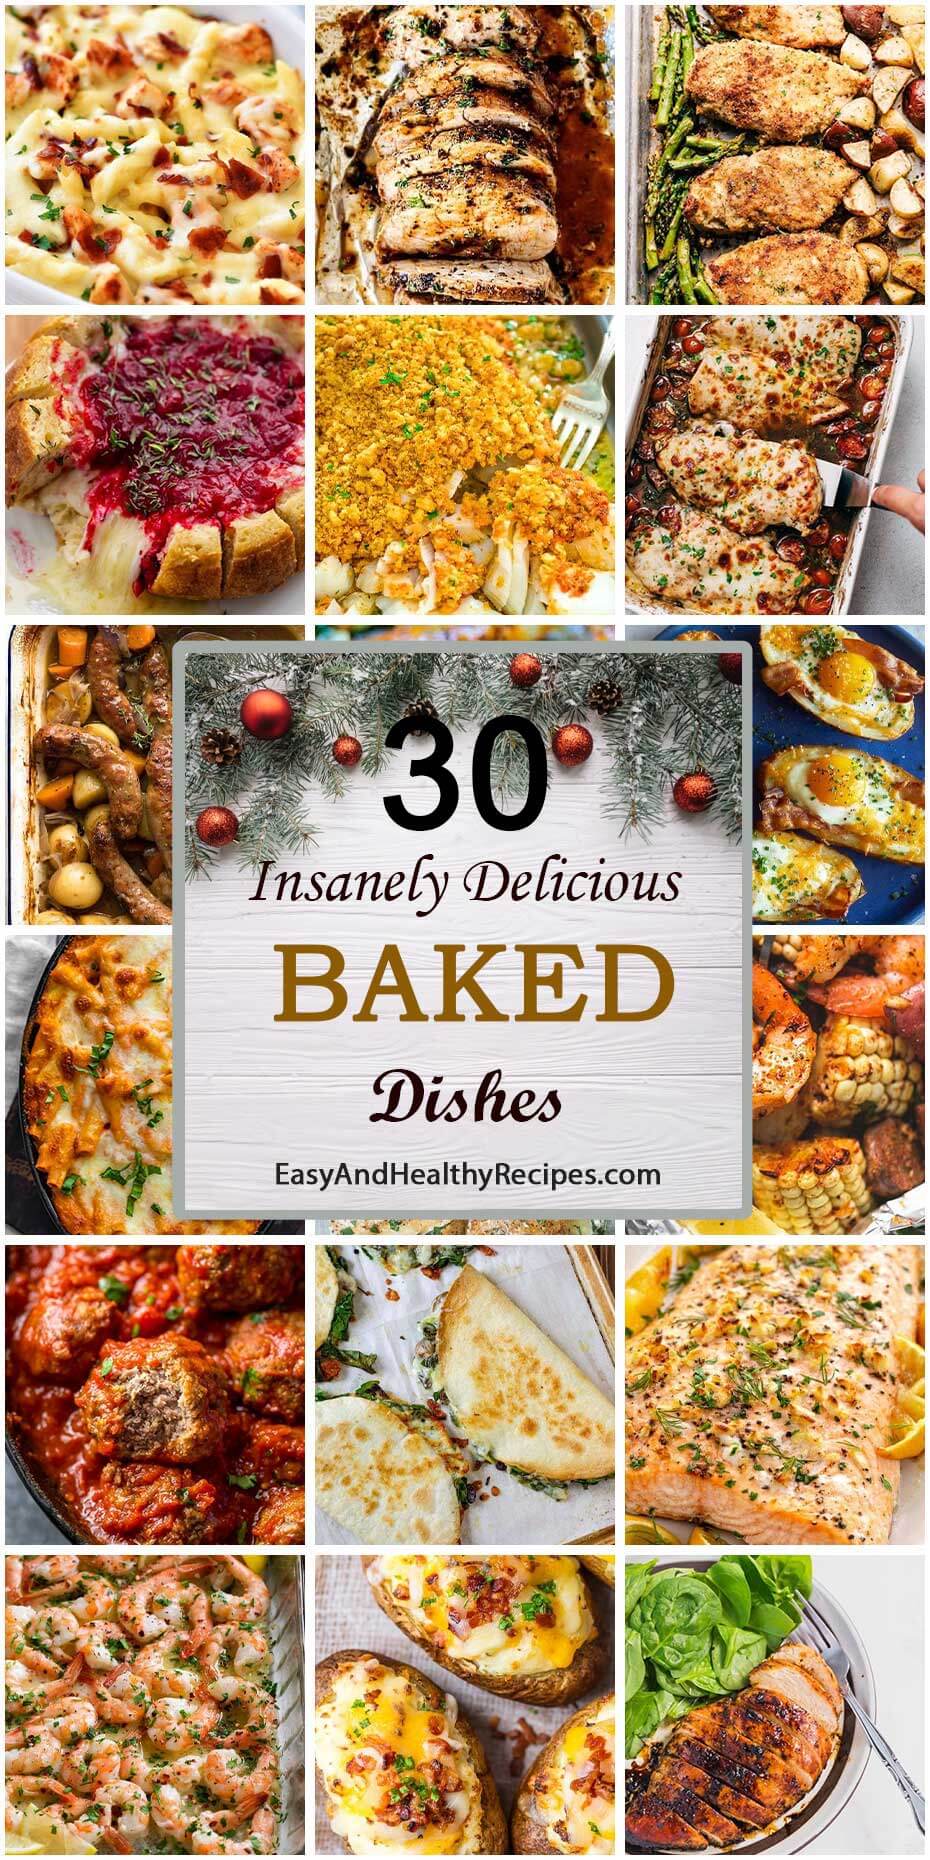 30 Insanely Delicious Baked Dishes